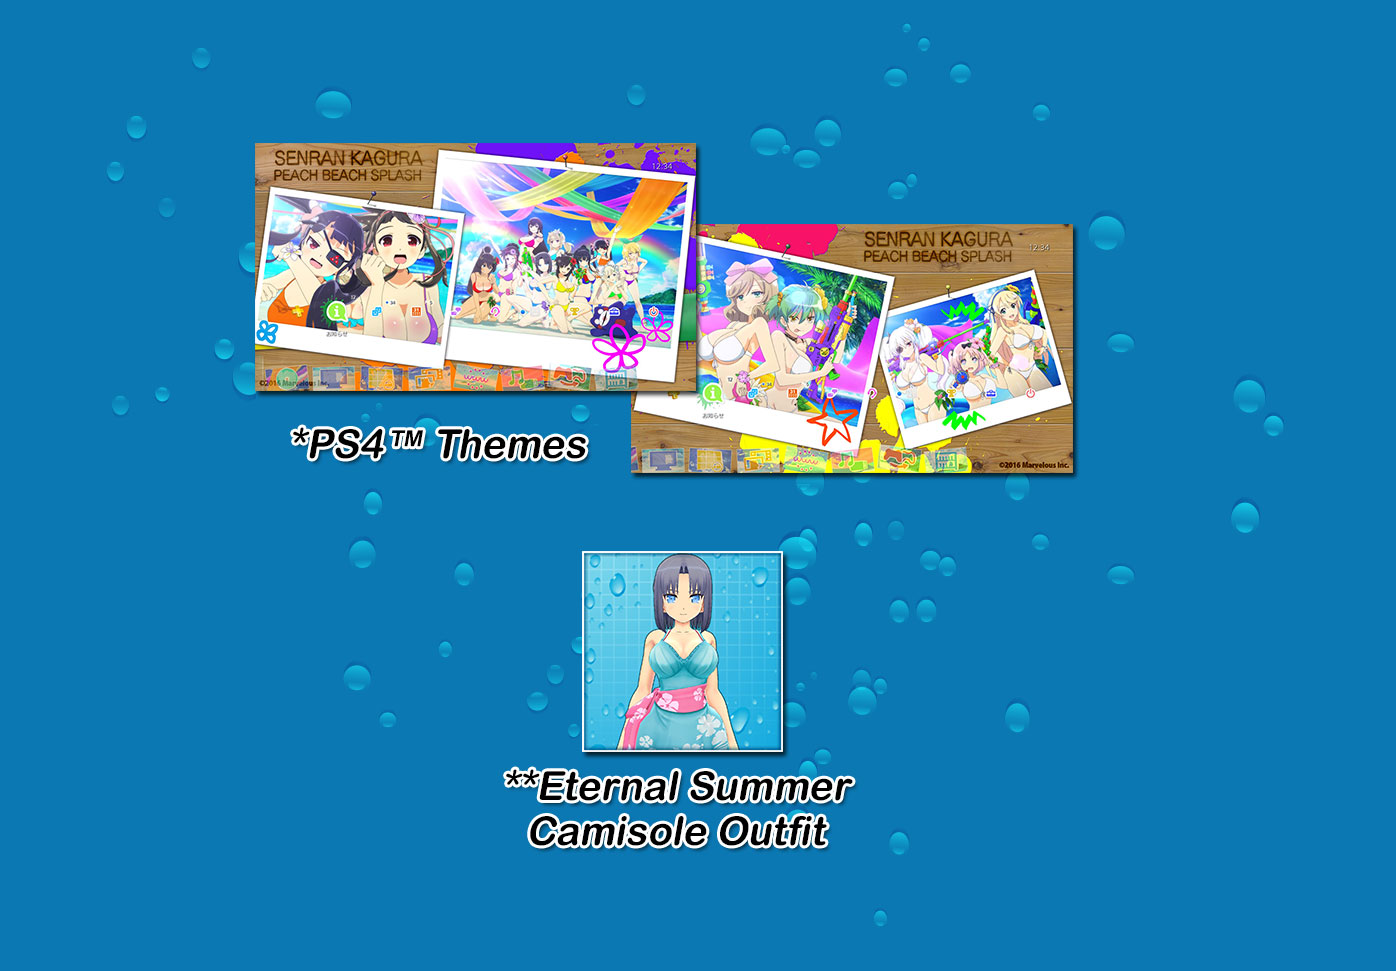 Limited Edition Sexy Soaker PS4 Themes and Eternal Summer Camisole Outfit